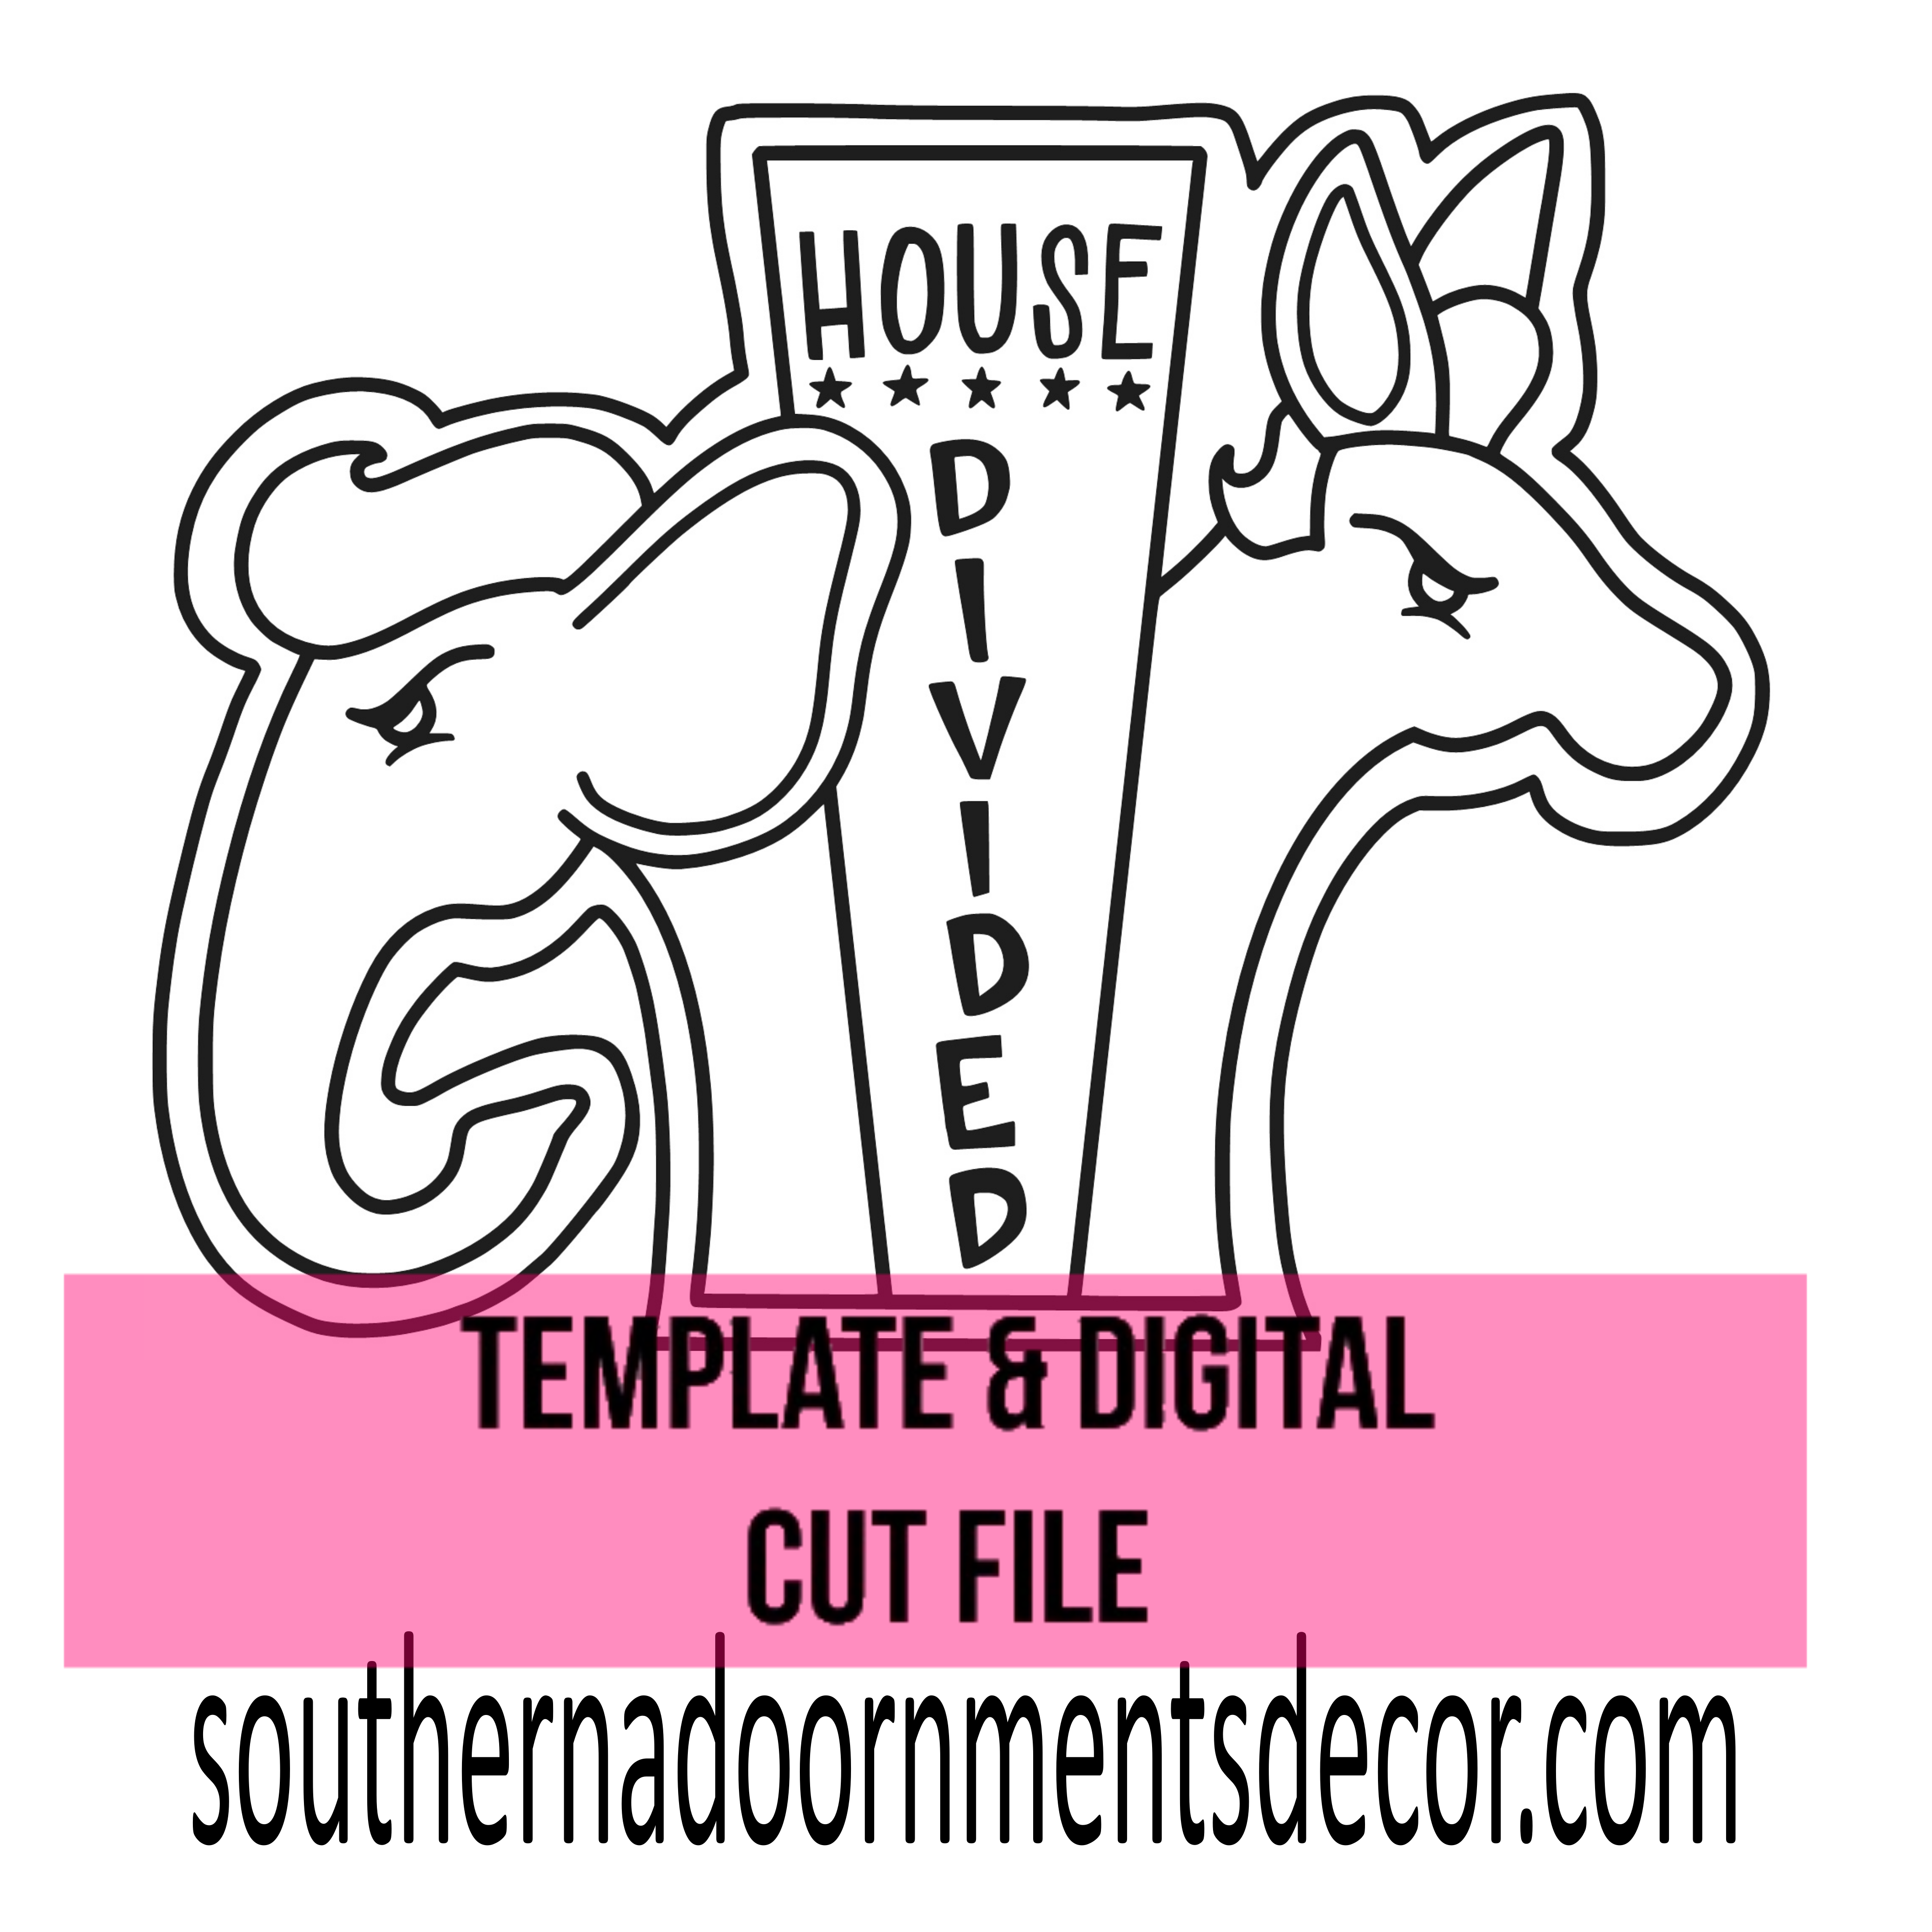 House Divided Template & Digital Cut File